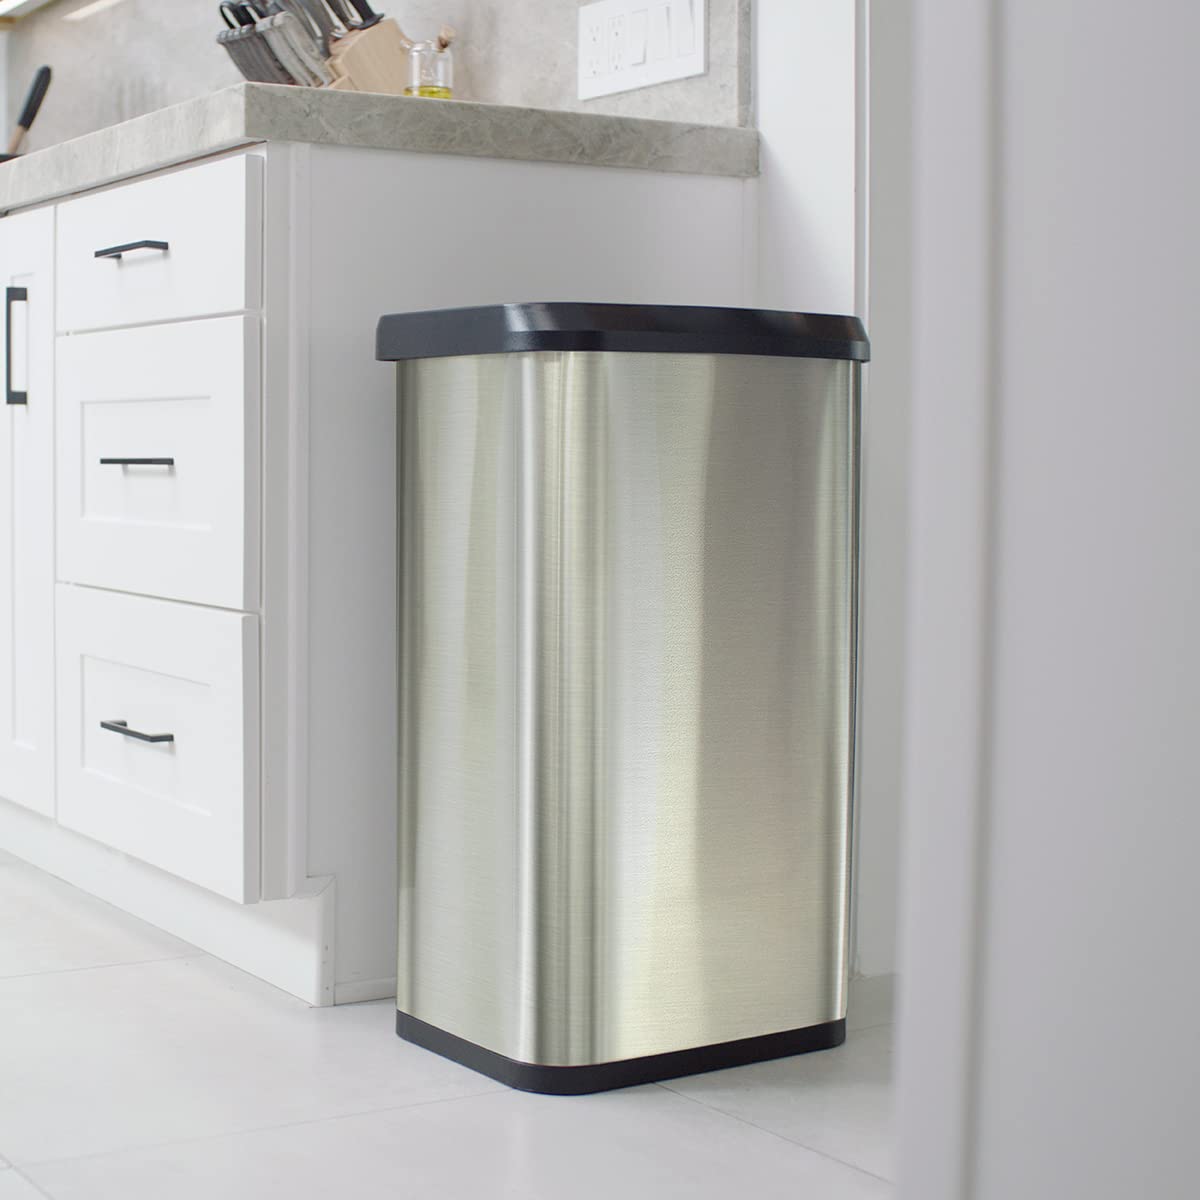 https://bigbigmart.com/wp-content/uploads/2023/05/Glad-Stainless-Steel-Trash-Can-with-Clorox-Odor-Protection-Touchless-Metal-Kitchen-Garbage-Bin-with-Soft-Close-Lid-and-Waste-Bag-Roll-Holder-20-Gallon-Motion-Sensor5.jpg